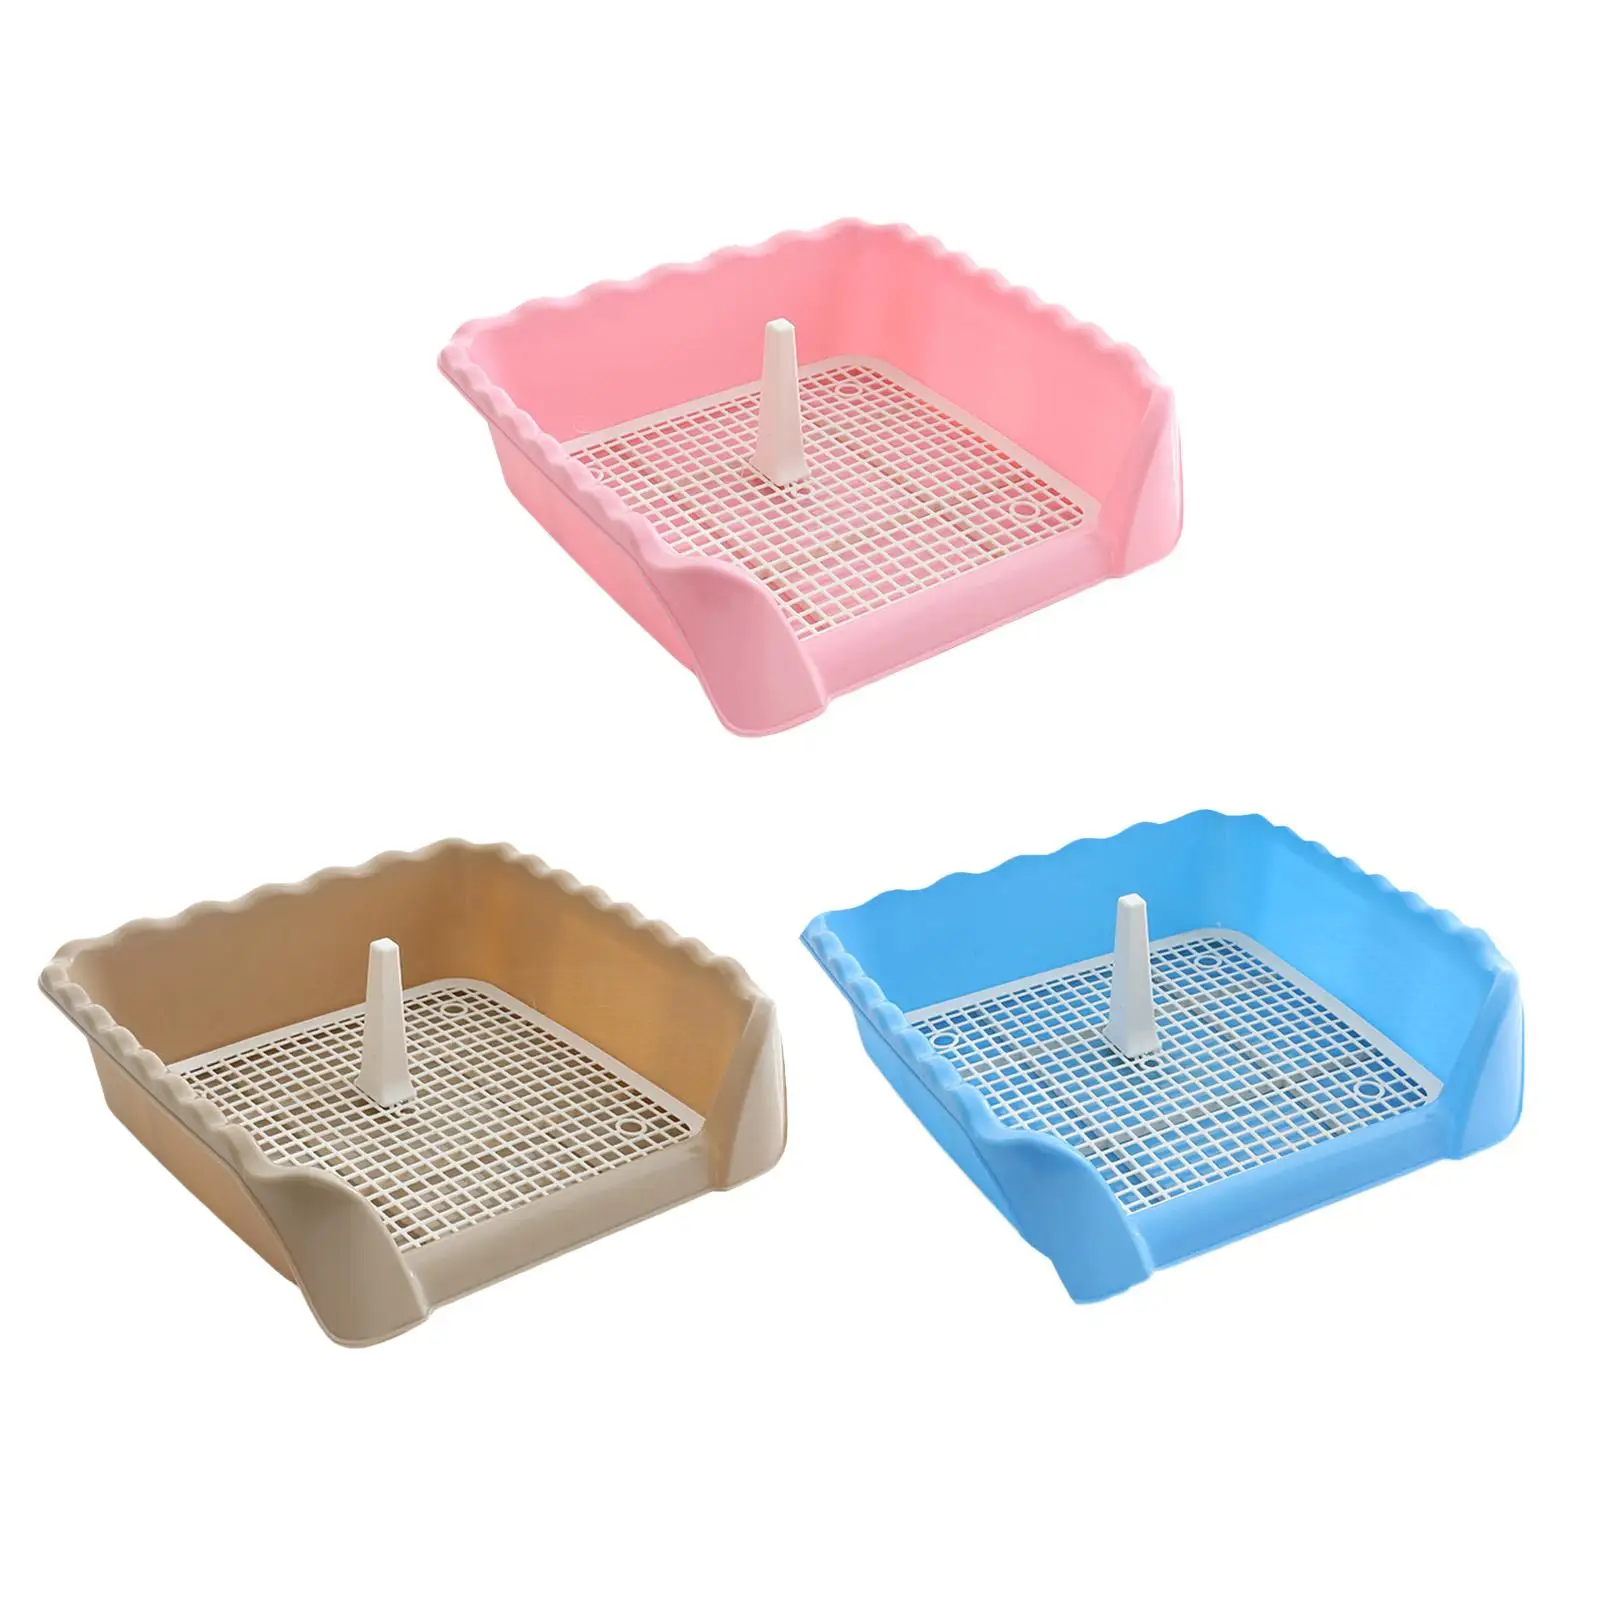 Indoor Dog Potty Tray with Protection keep Floors lean Dog Toilet